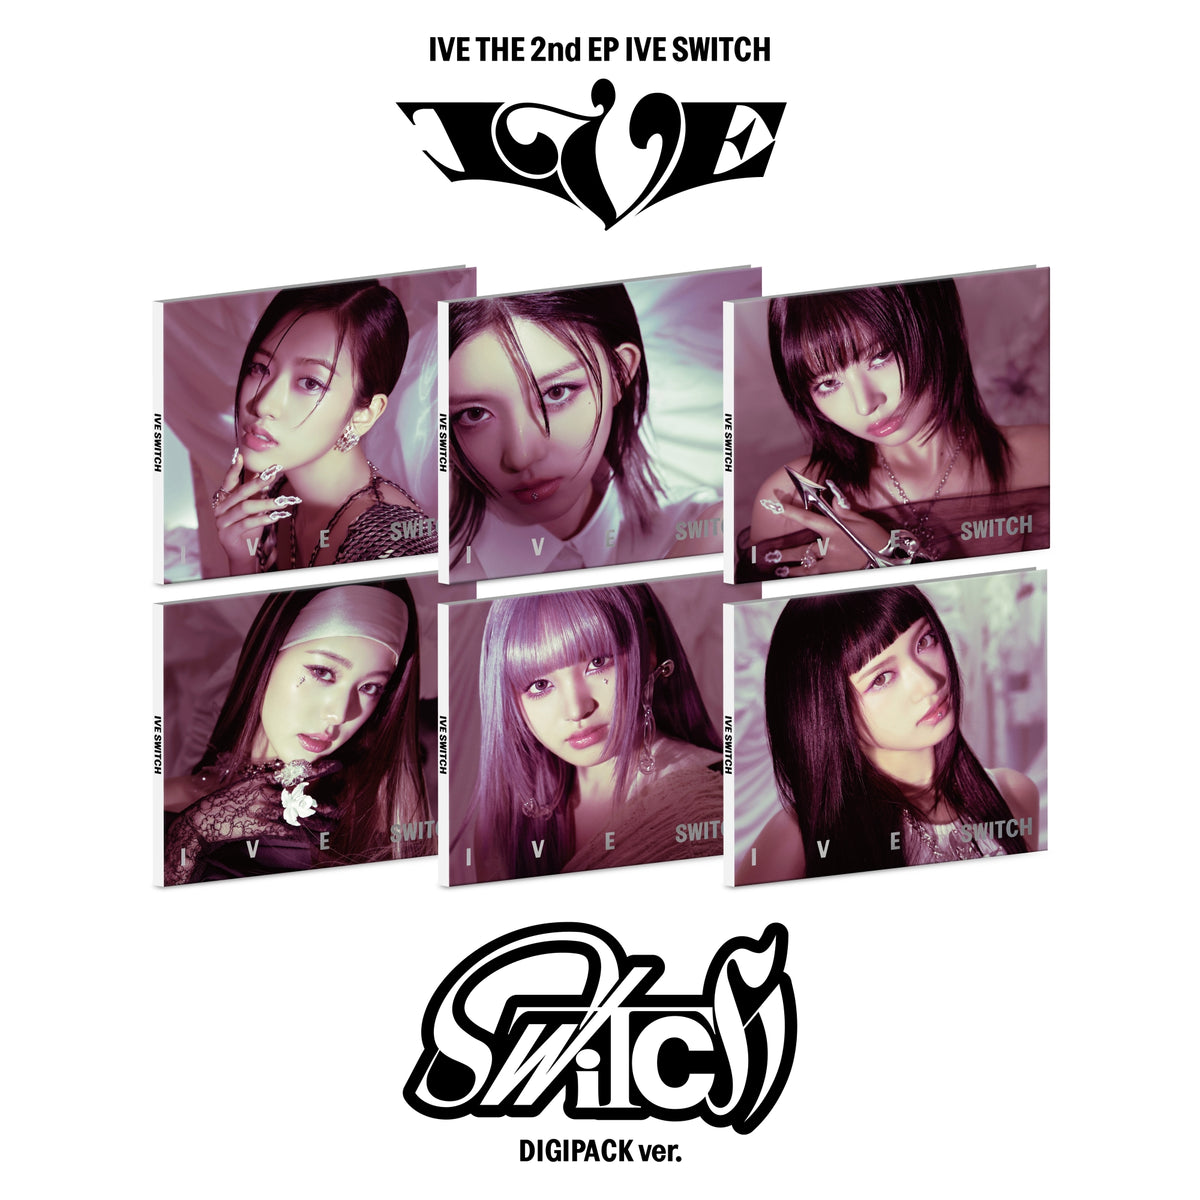 [POB] IVE THE 2nd EP IVE SWITCH (DIGIPACK VER.)